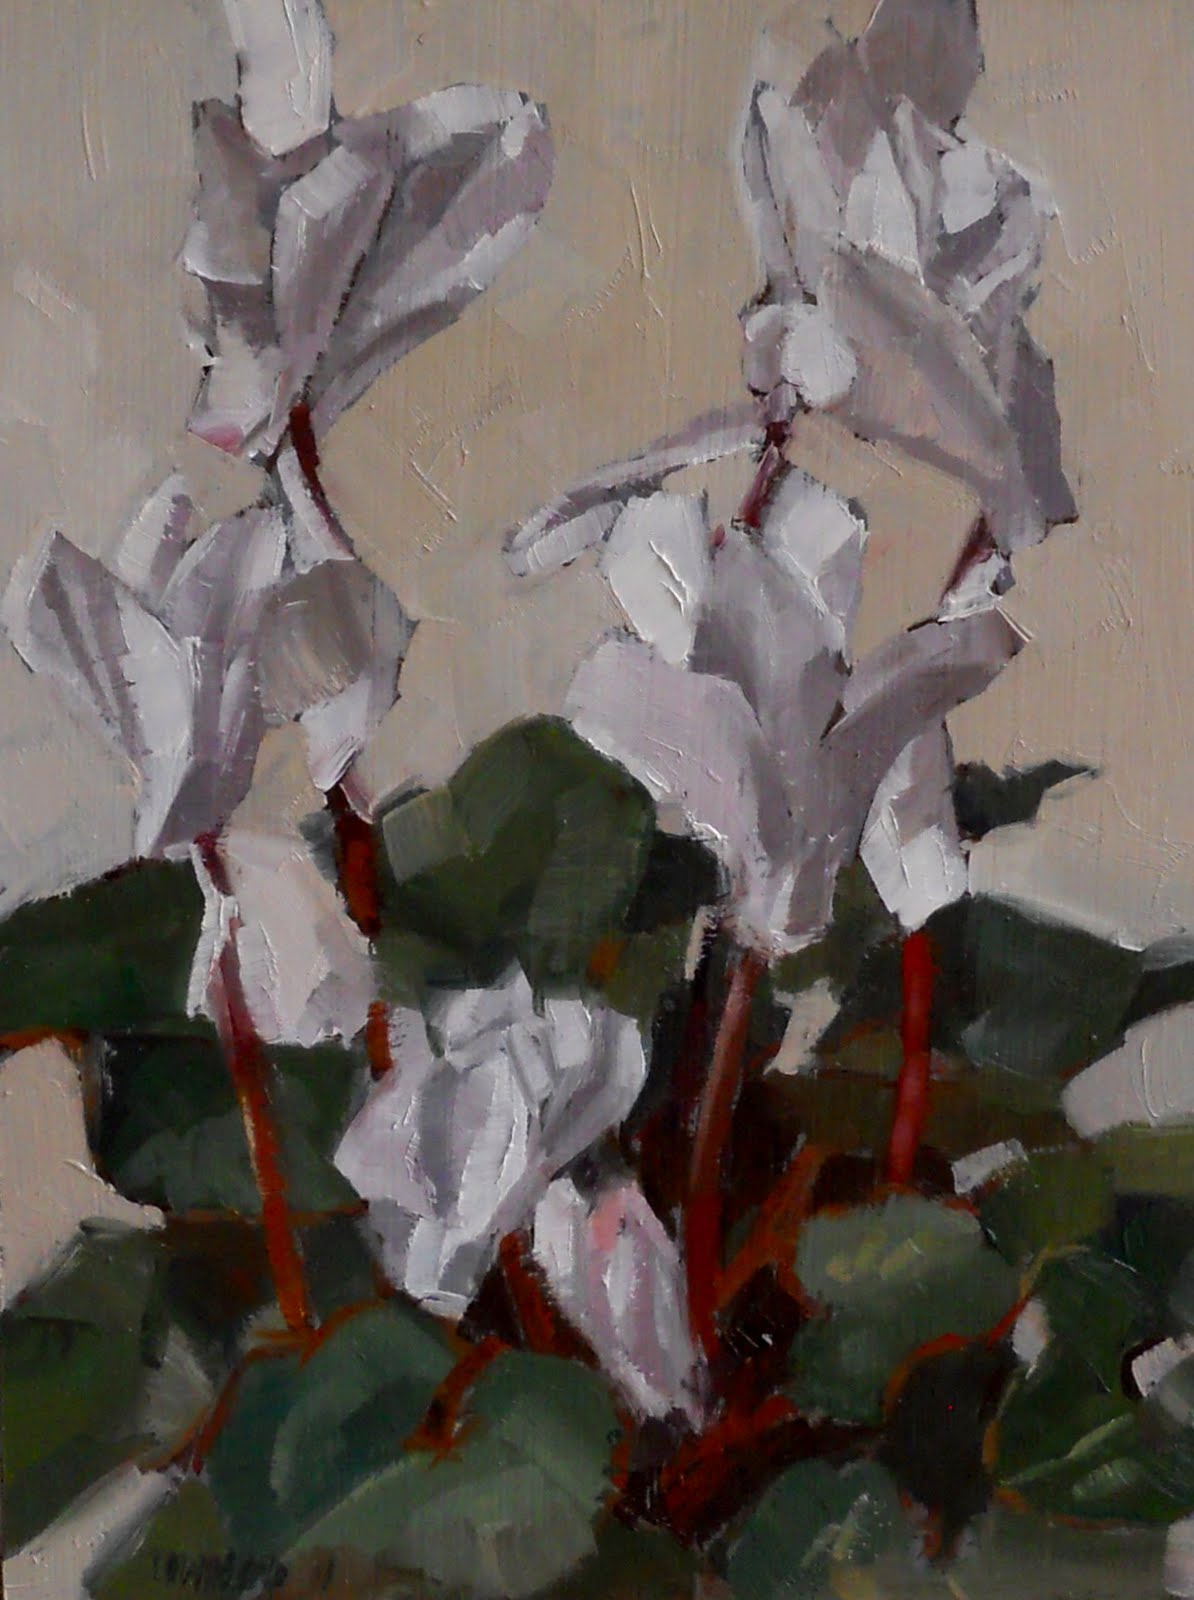 Jean Townsend's Daily Painting: February 2011